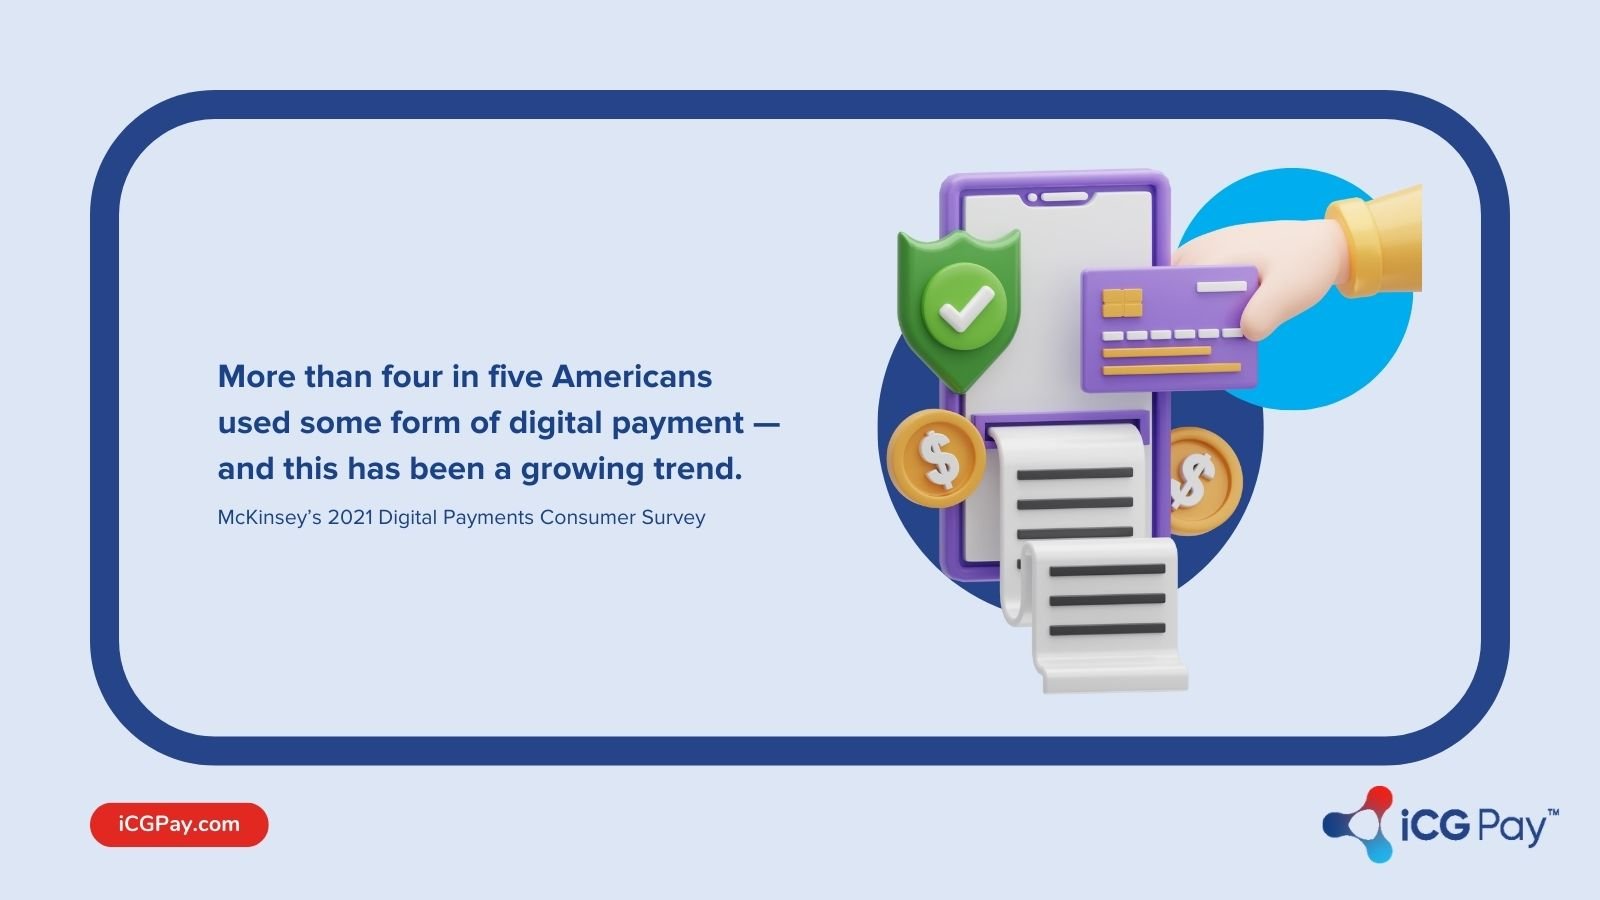 Digital payments in the US